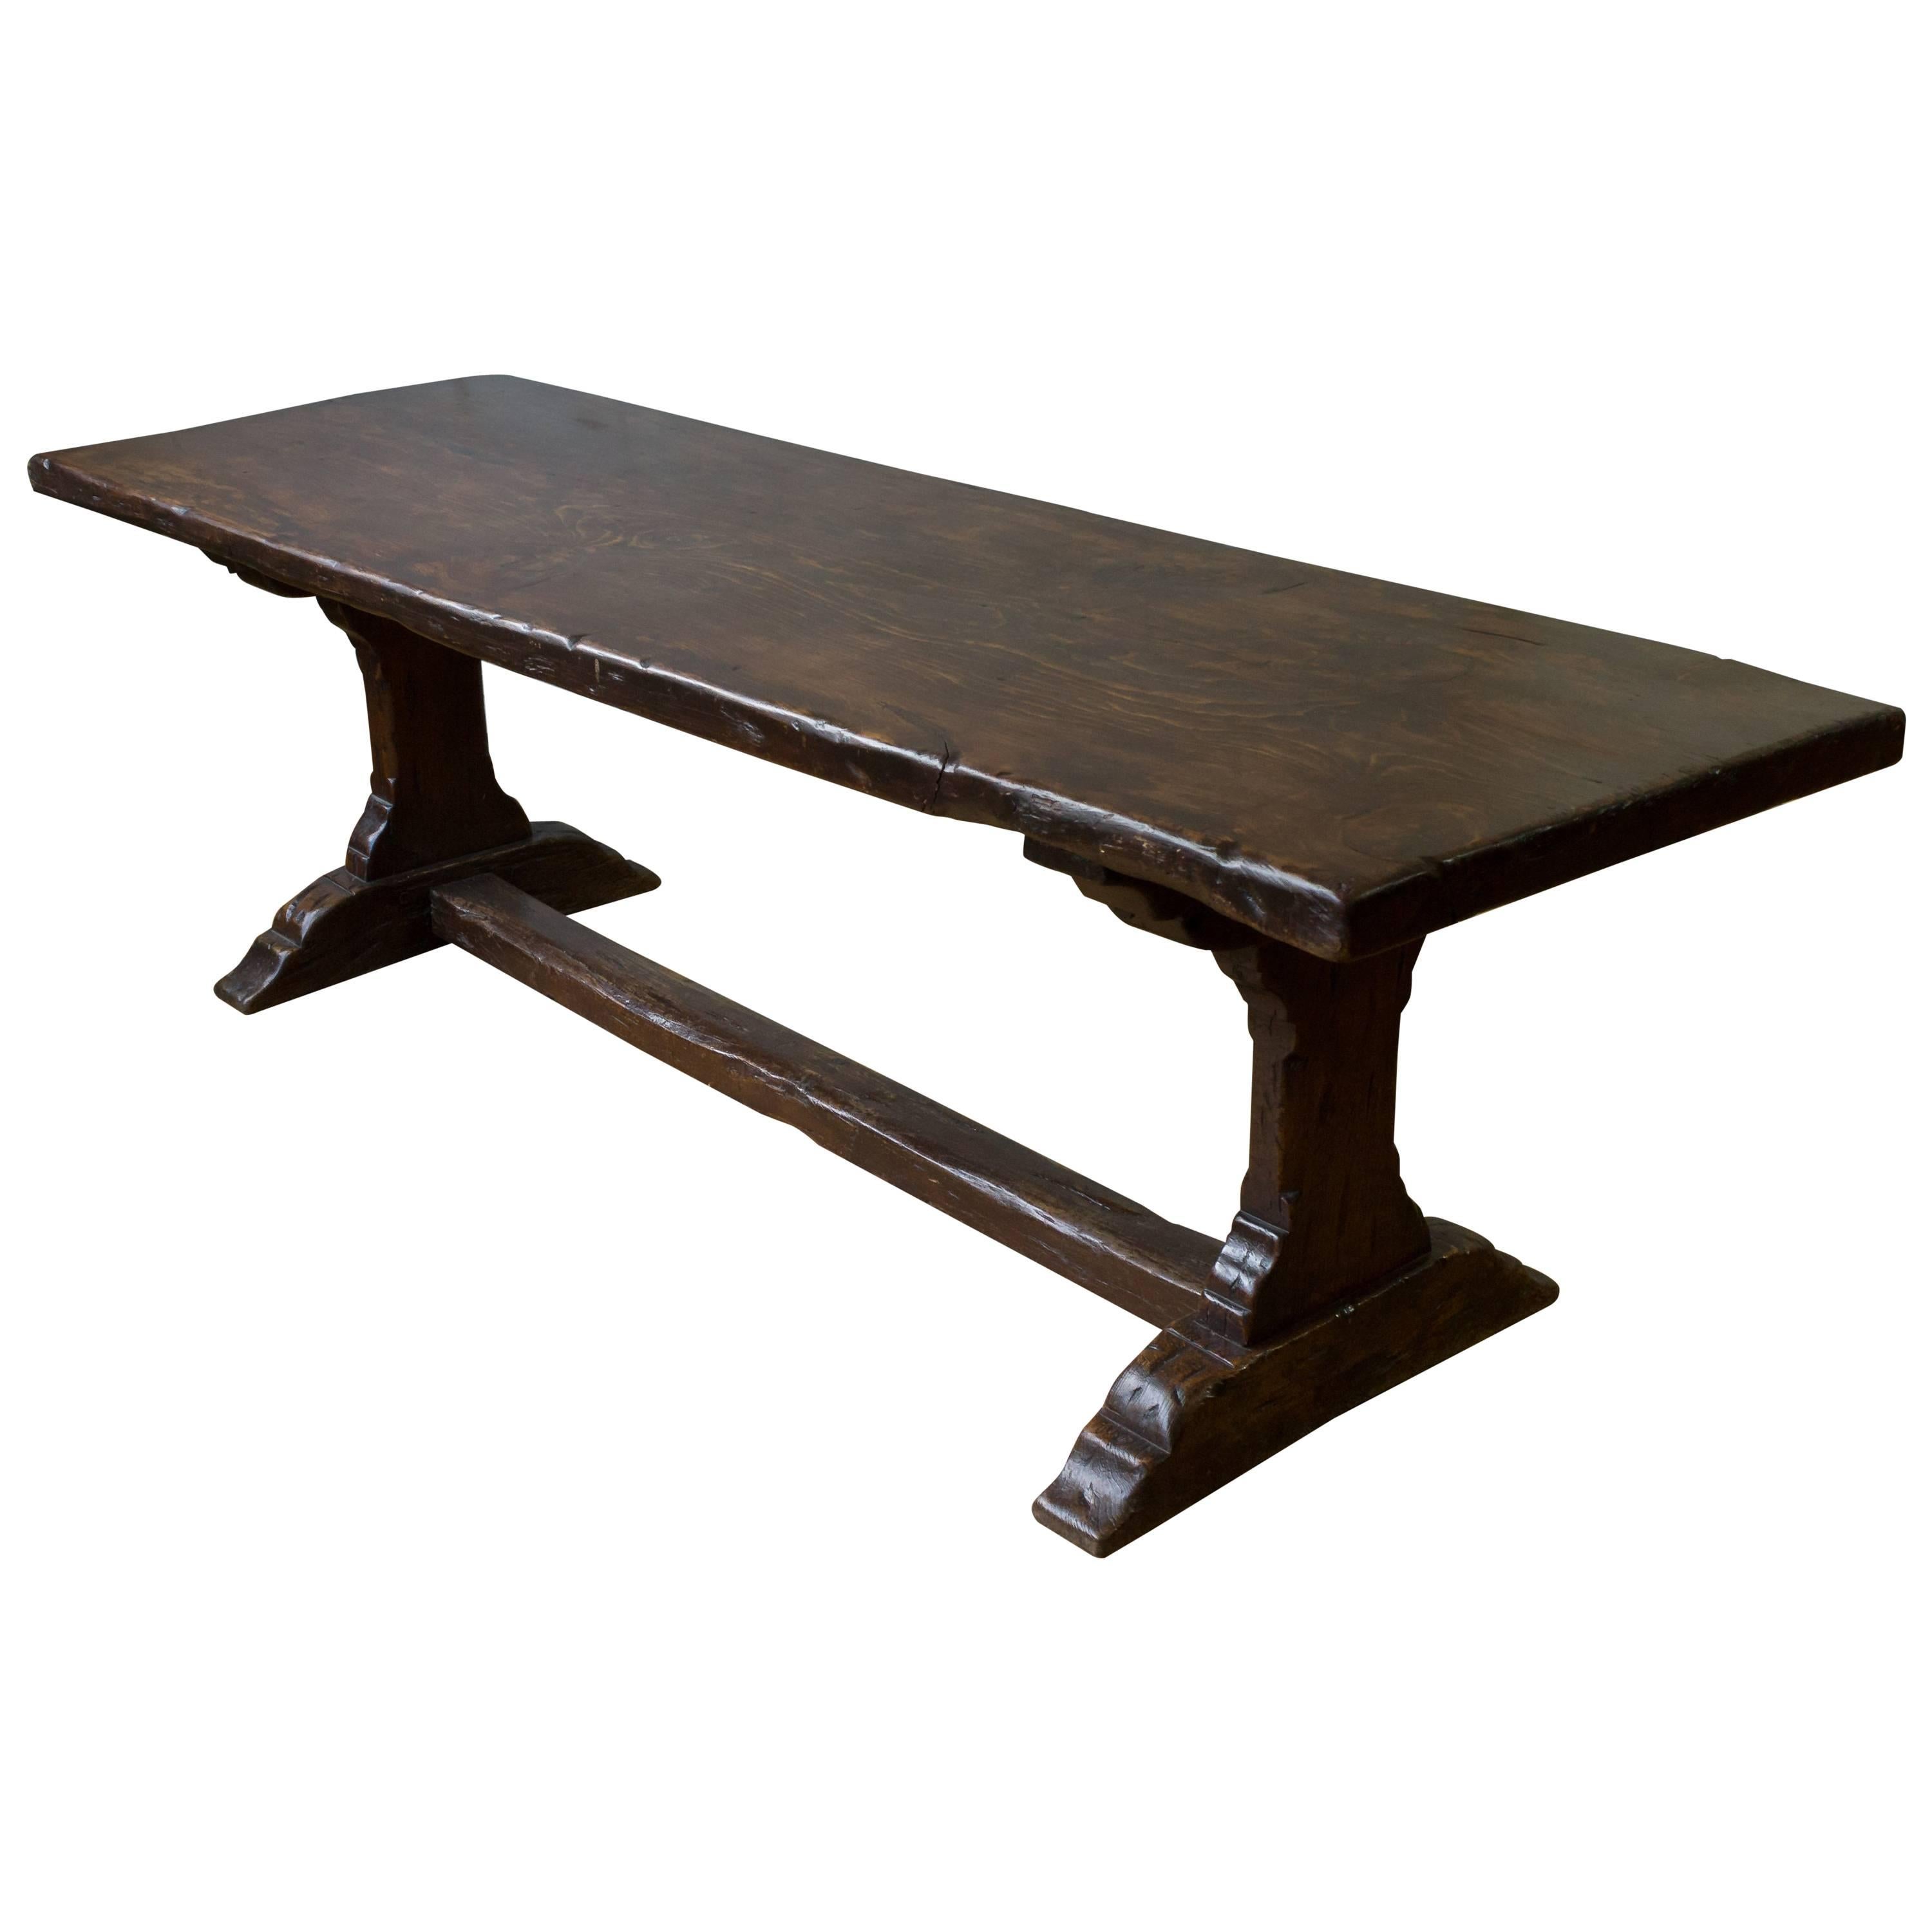 French, Early 19th Century Monastery Table